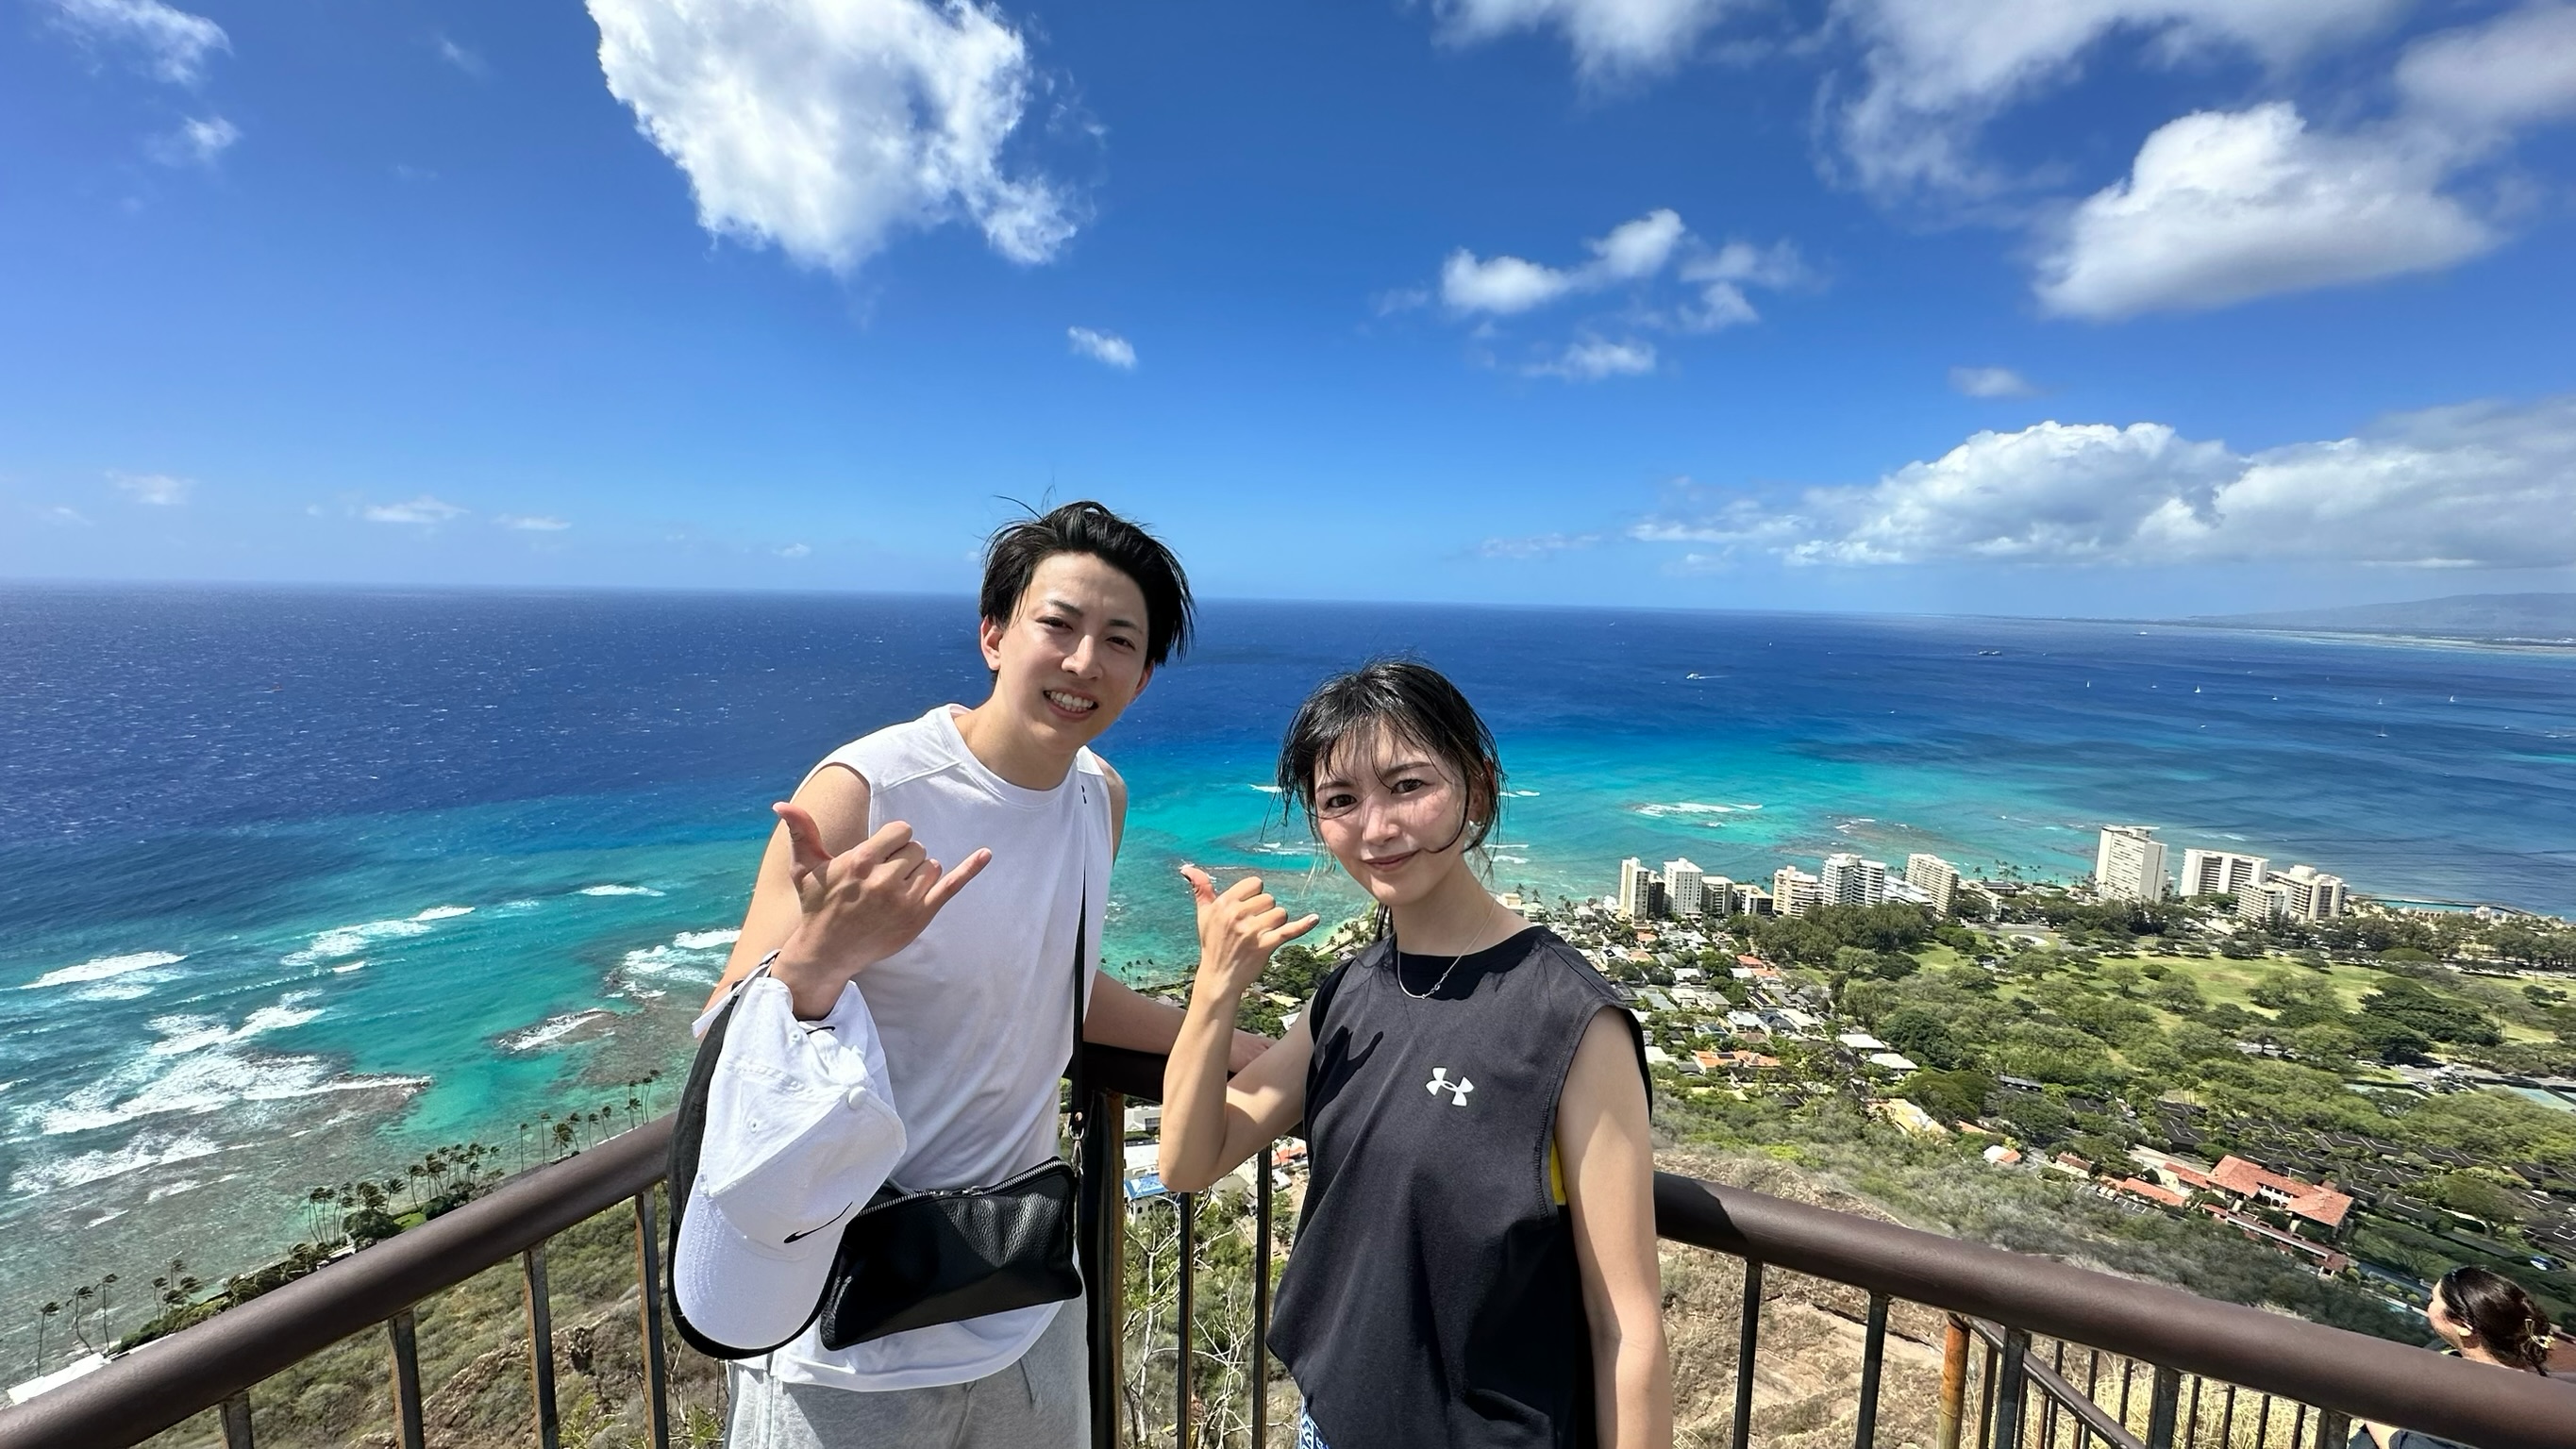 You are currently viewing 結婚3年目の祝い旅行に行ってきました！